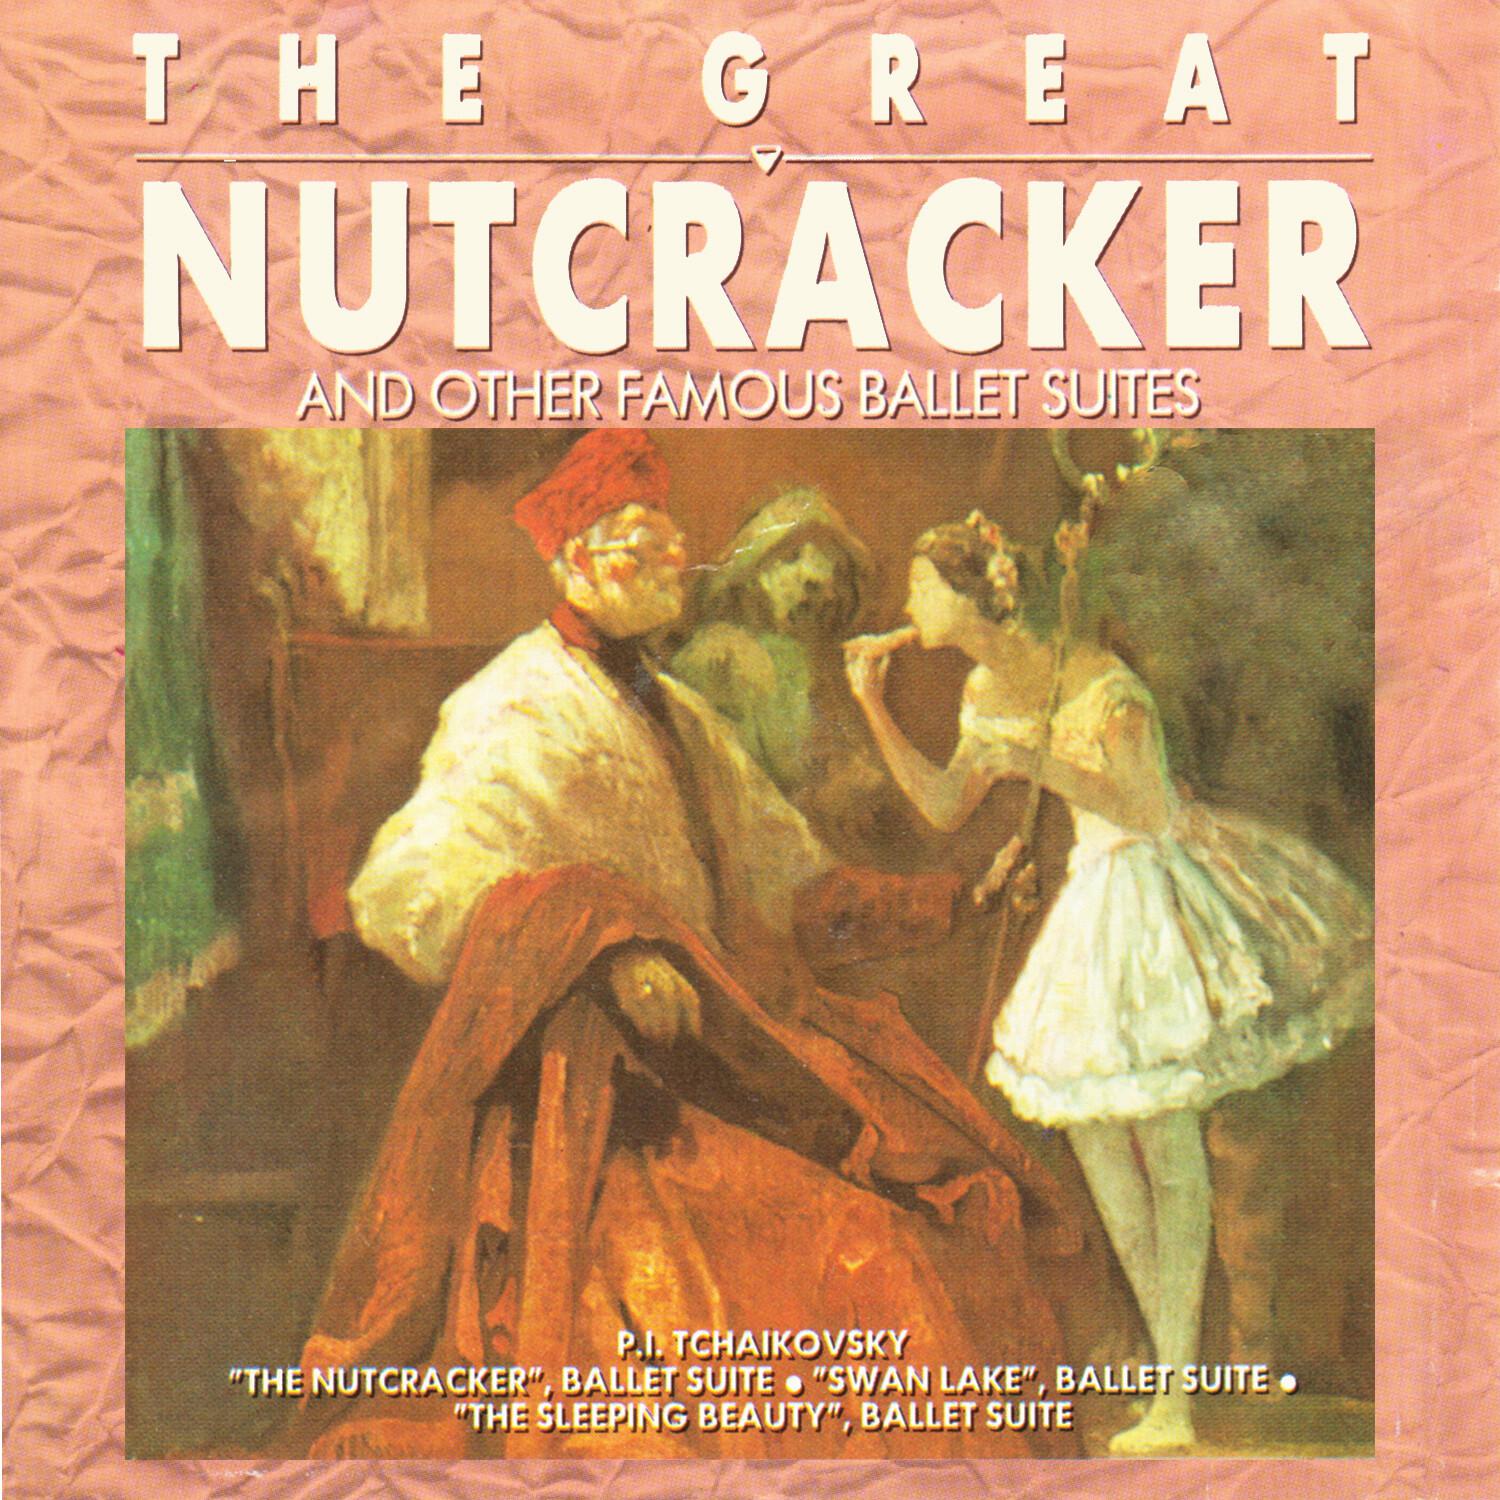 The Great Nutcracker and Other Famous Ballet Suites